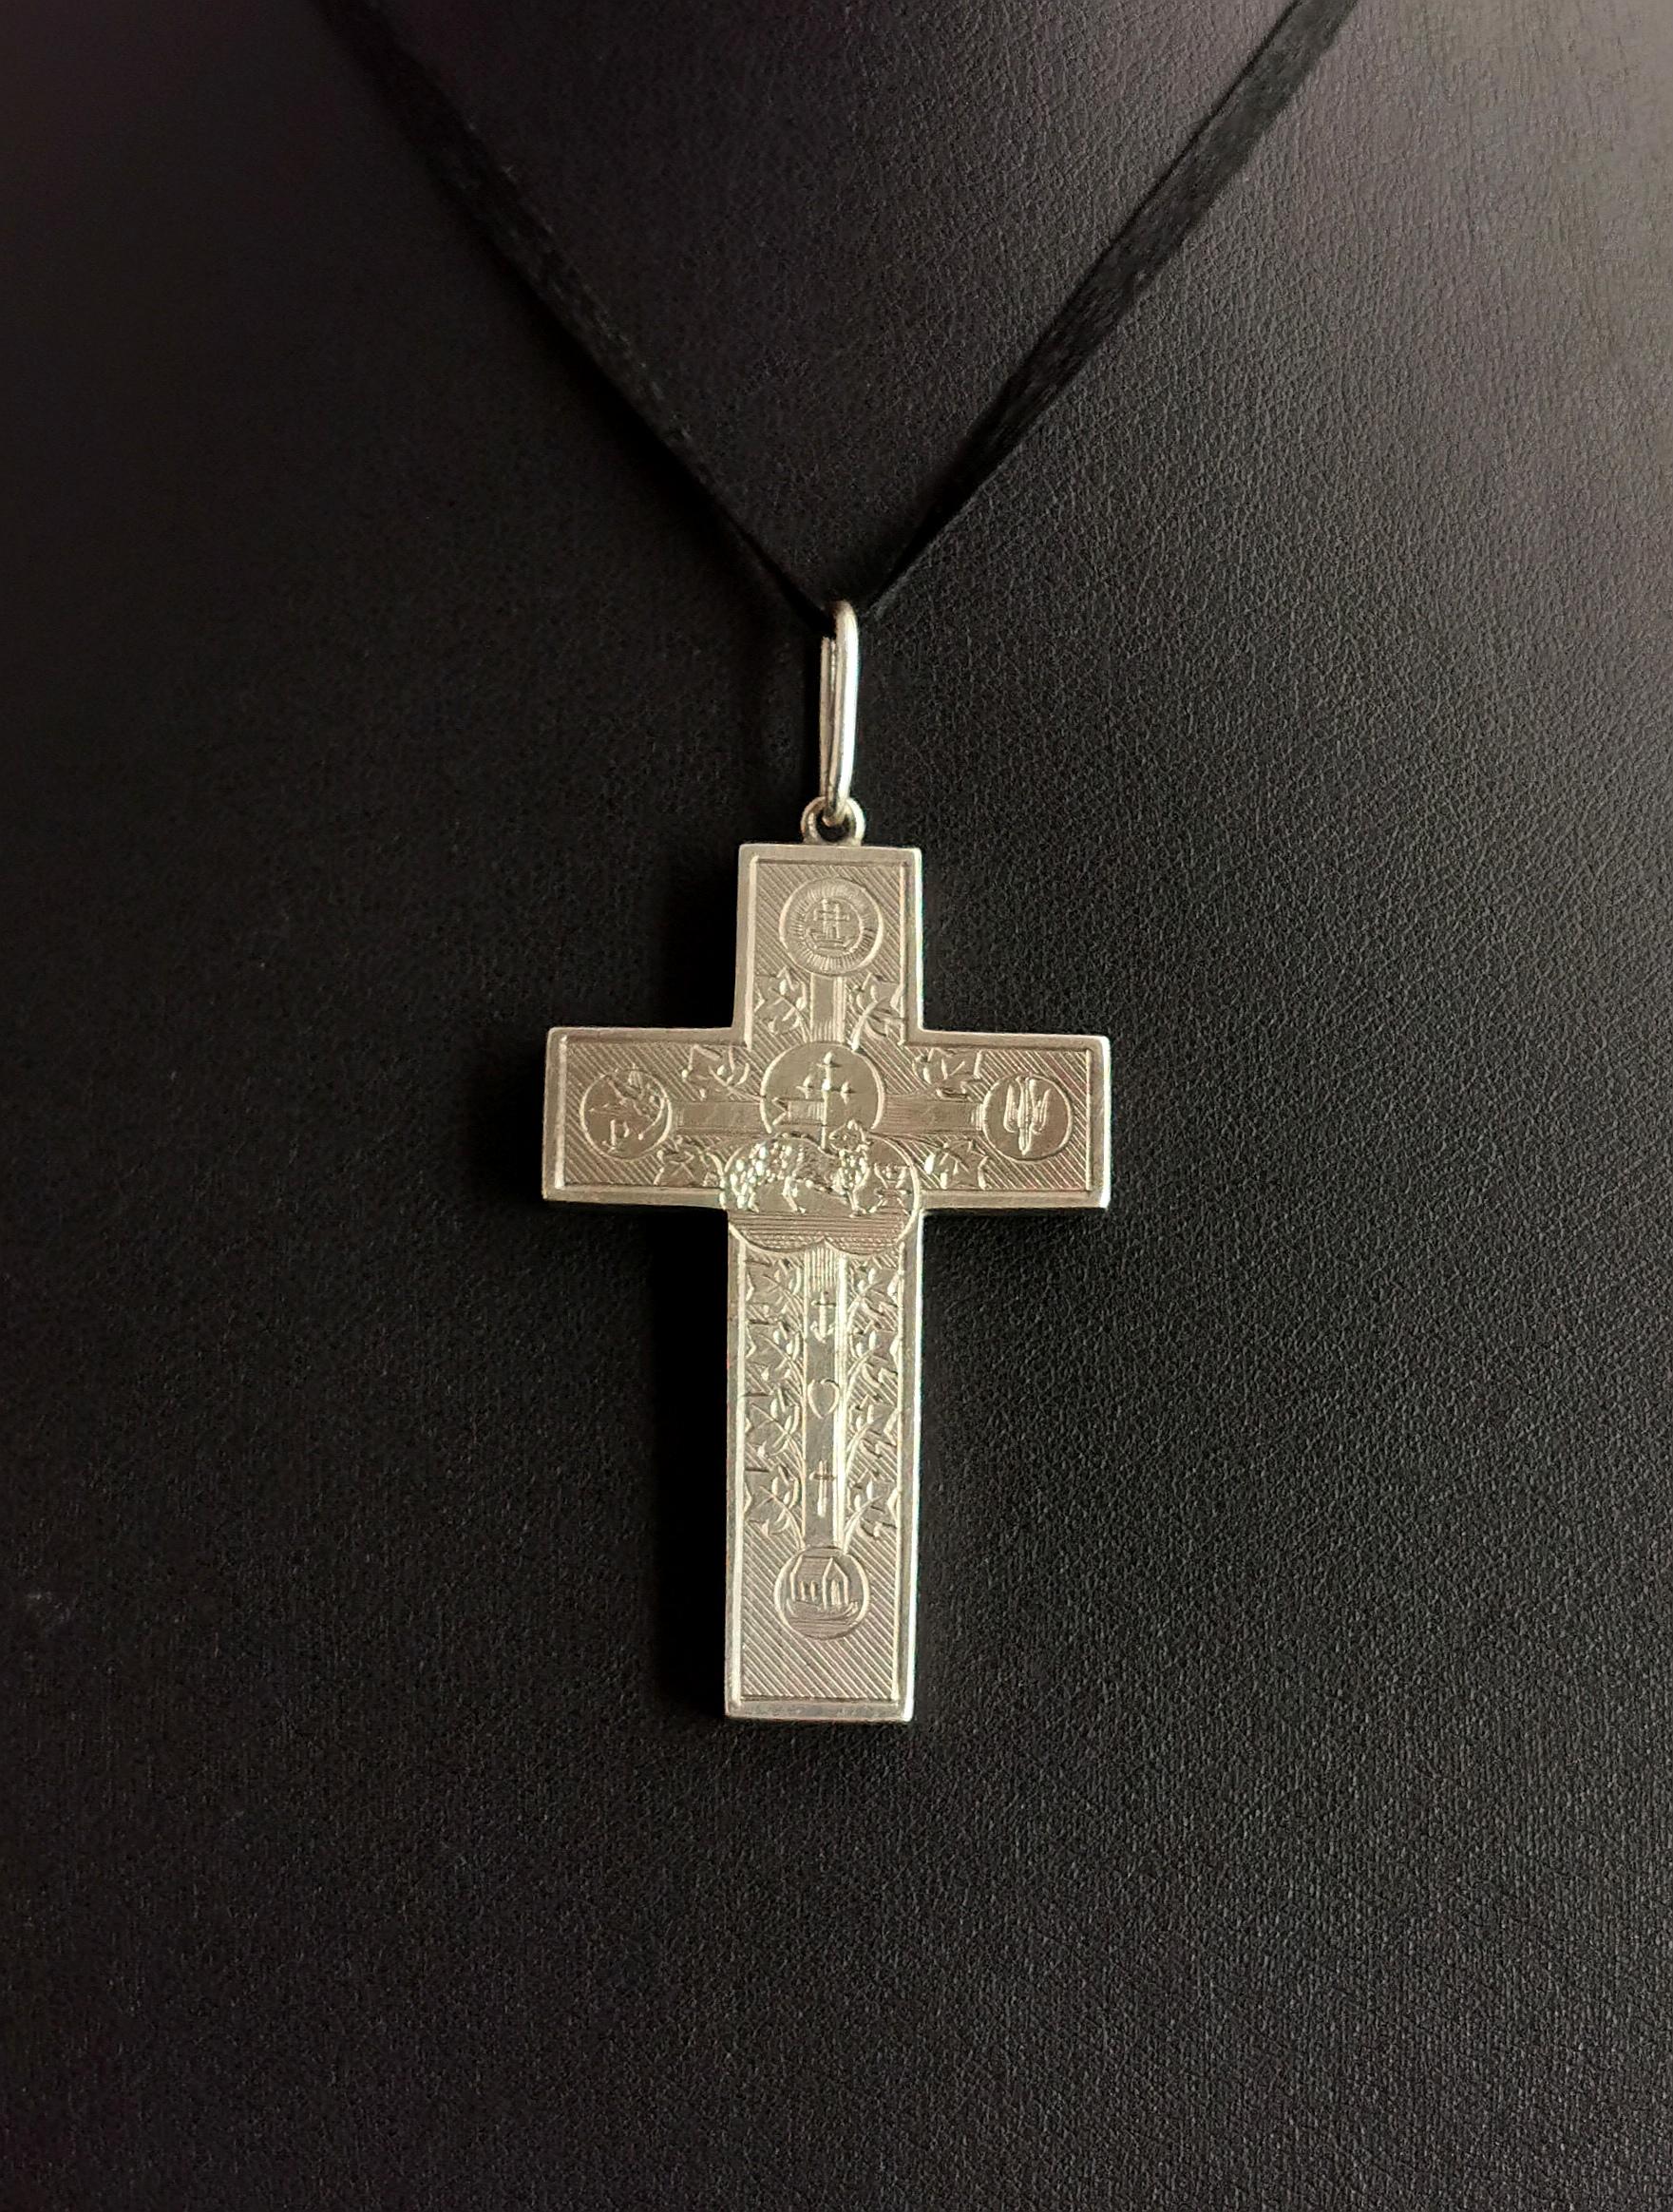 Antique Victorian Engraved Silver Cross Pendant, Peace, Faith, Hope and Charity 1